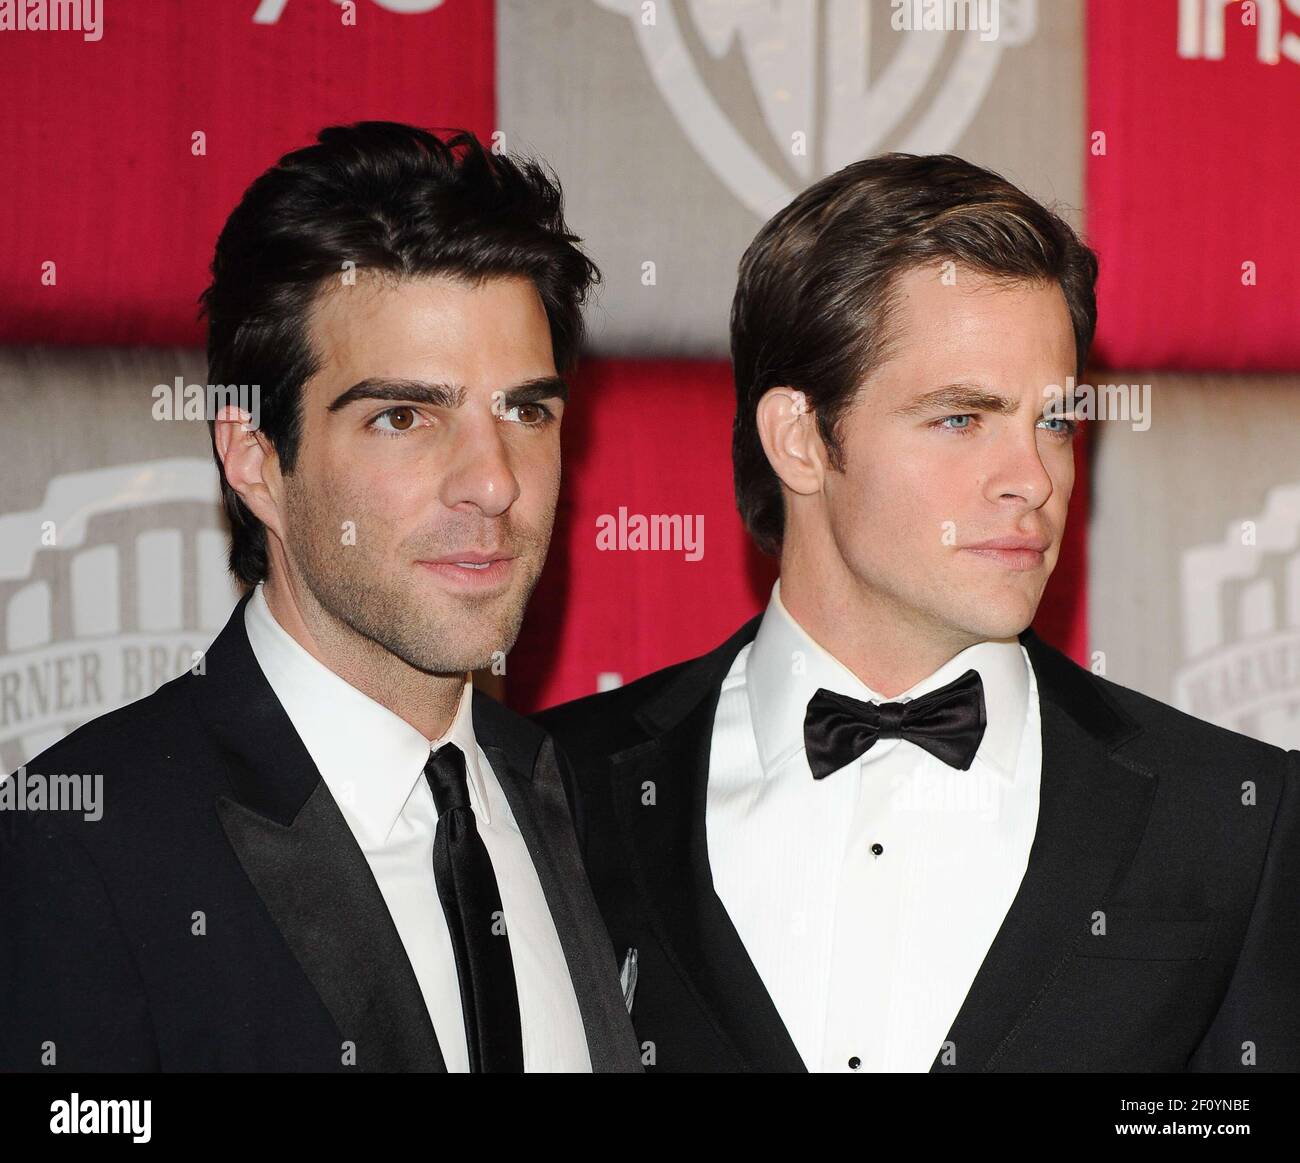 Zachary Quinto and Chris Pine. 11 January 2009, California. The 66th Golden  Globe Awards - In Style Warner Brothers Party held at The Beverly Hilton  Hotel. Photo Credit: Giulio Marcocchi/Sipa Press./InStyleG gm.188/0901122155